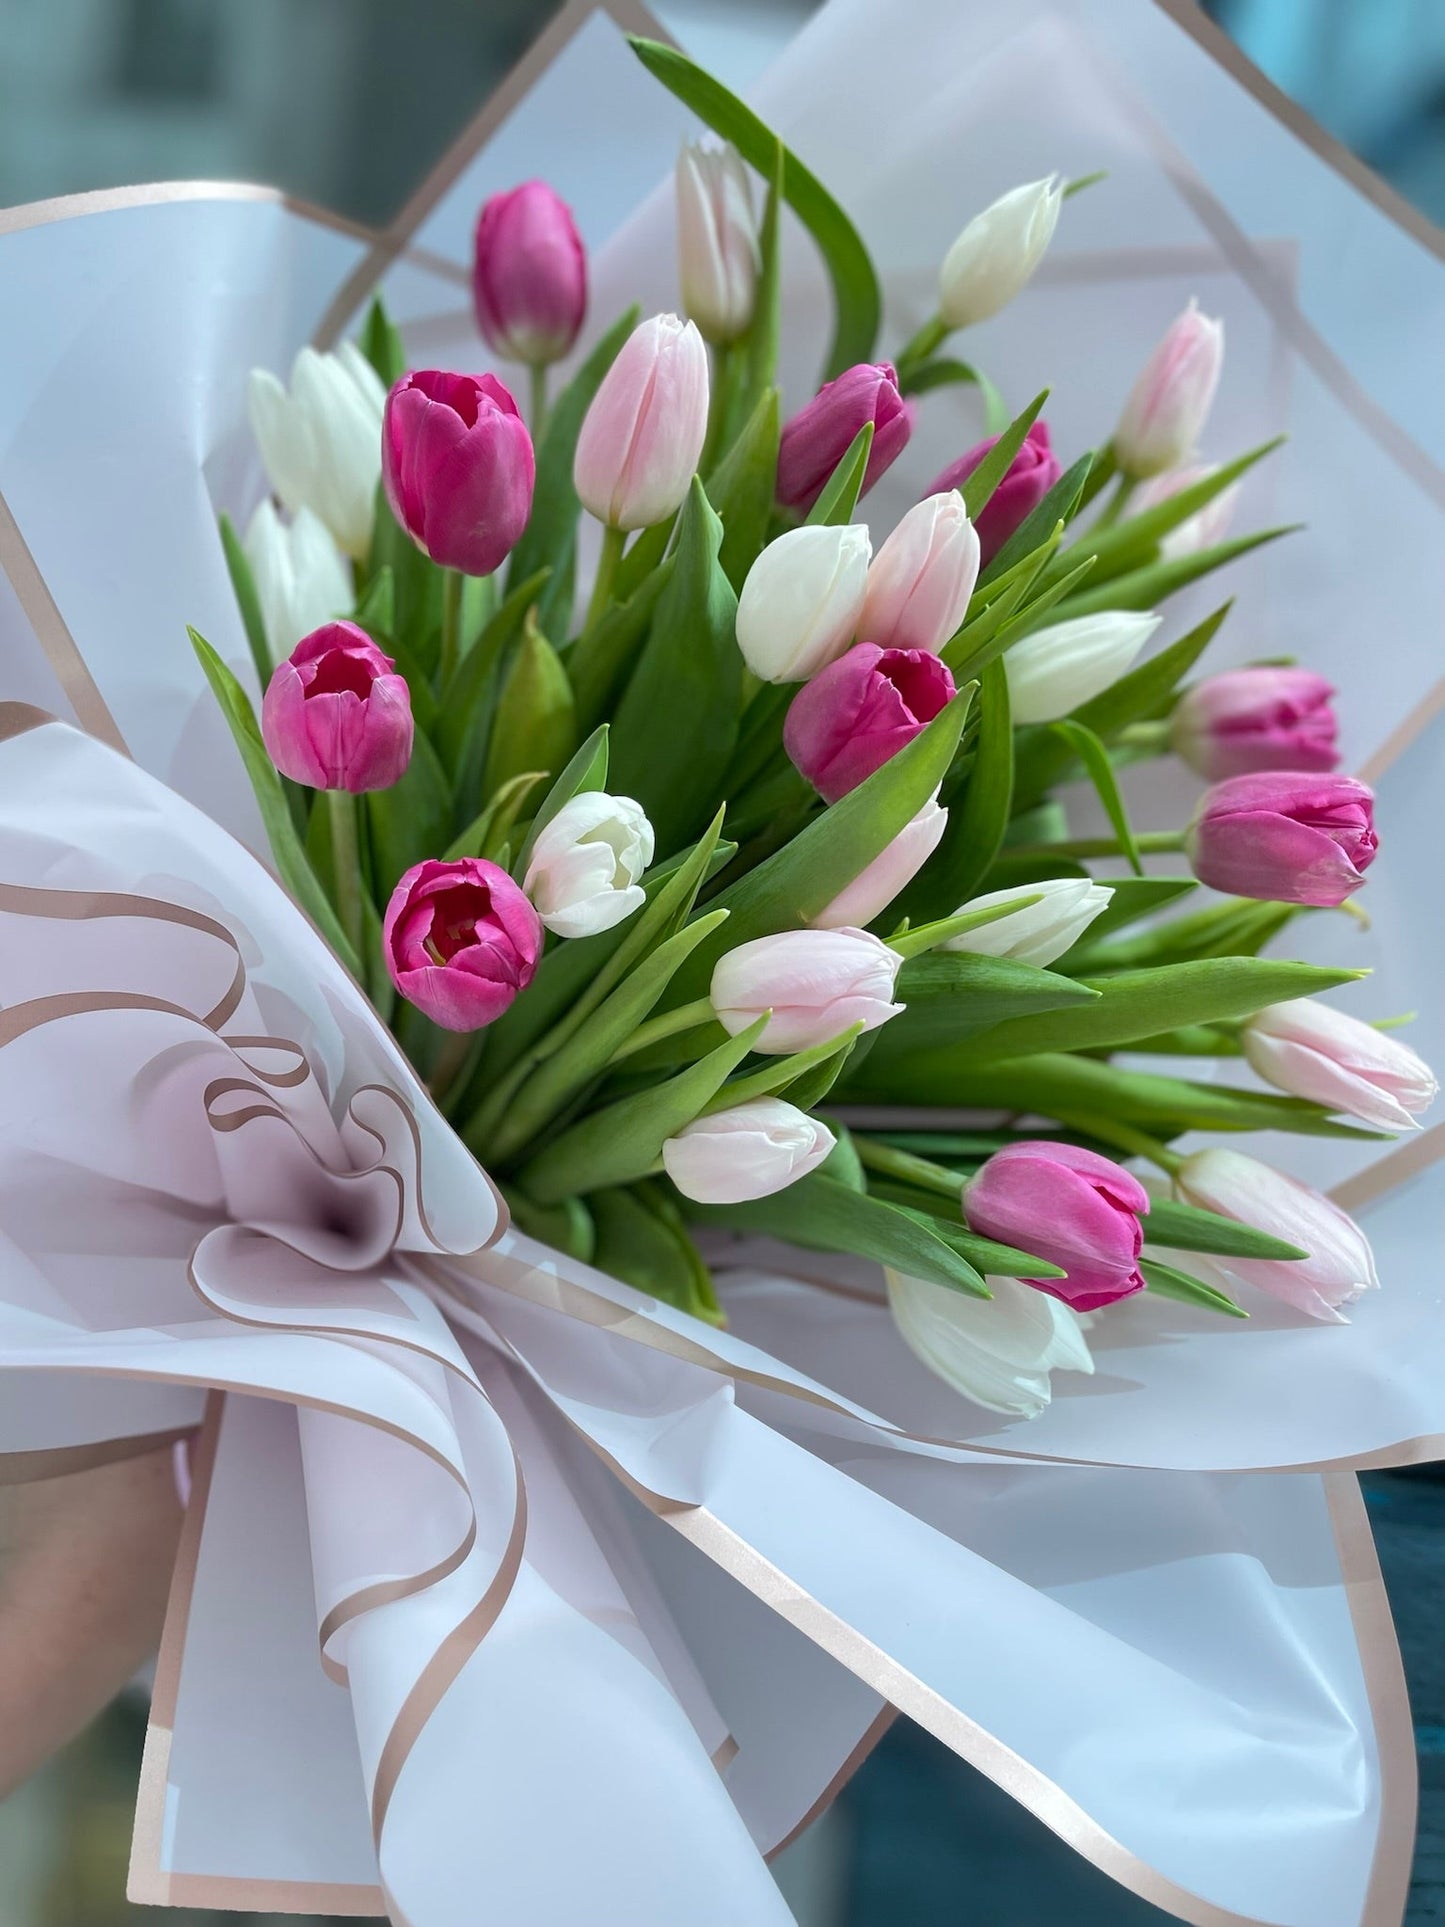 Mixed pink and white tulips